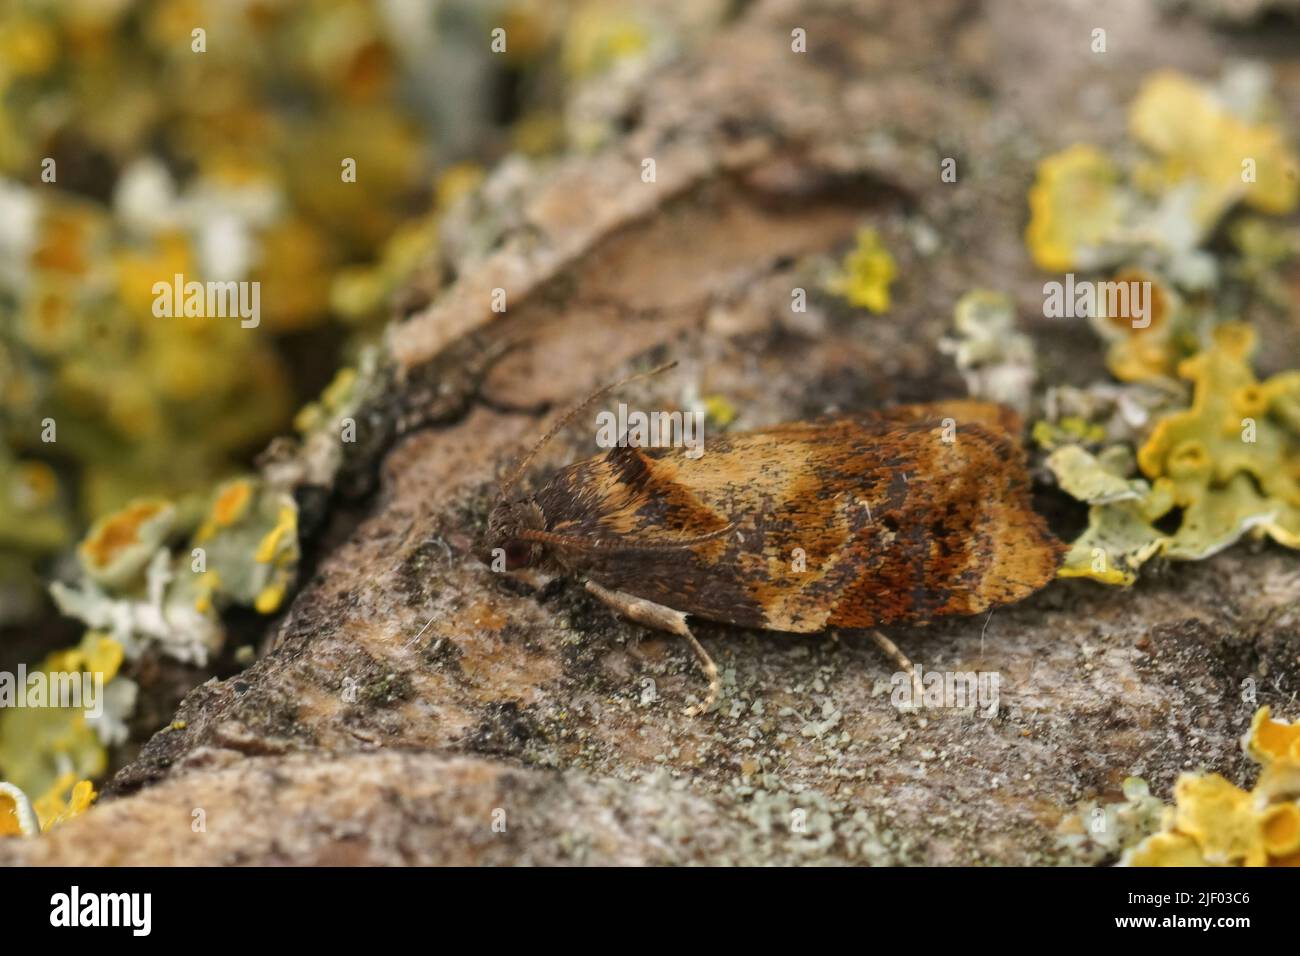 Closeup on the small red-barred tortrix moth, Ditula angustiorana sitting on wood in the garden Stock Photo